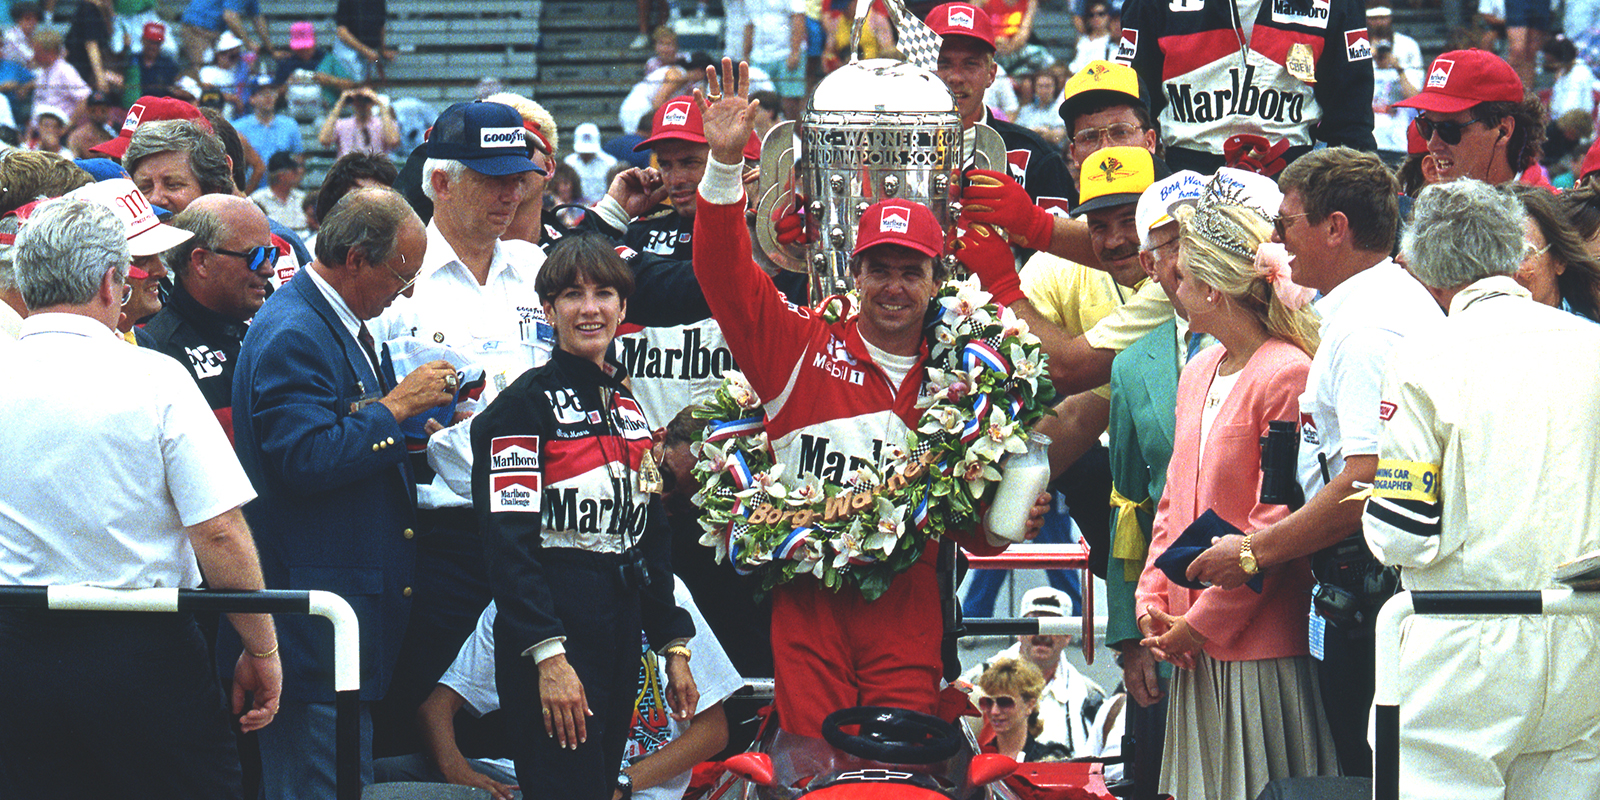 Rick Mears’ Spectacular Fourth Indy 500 Win